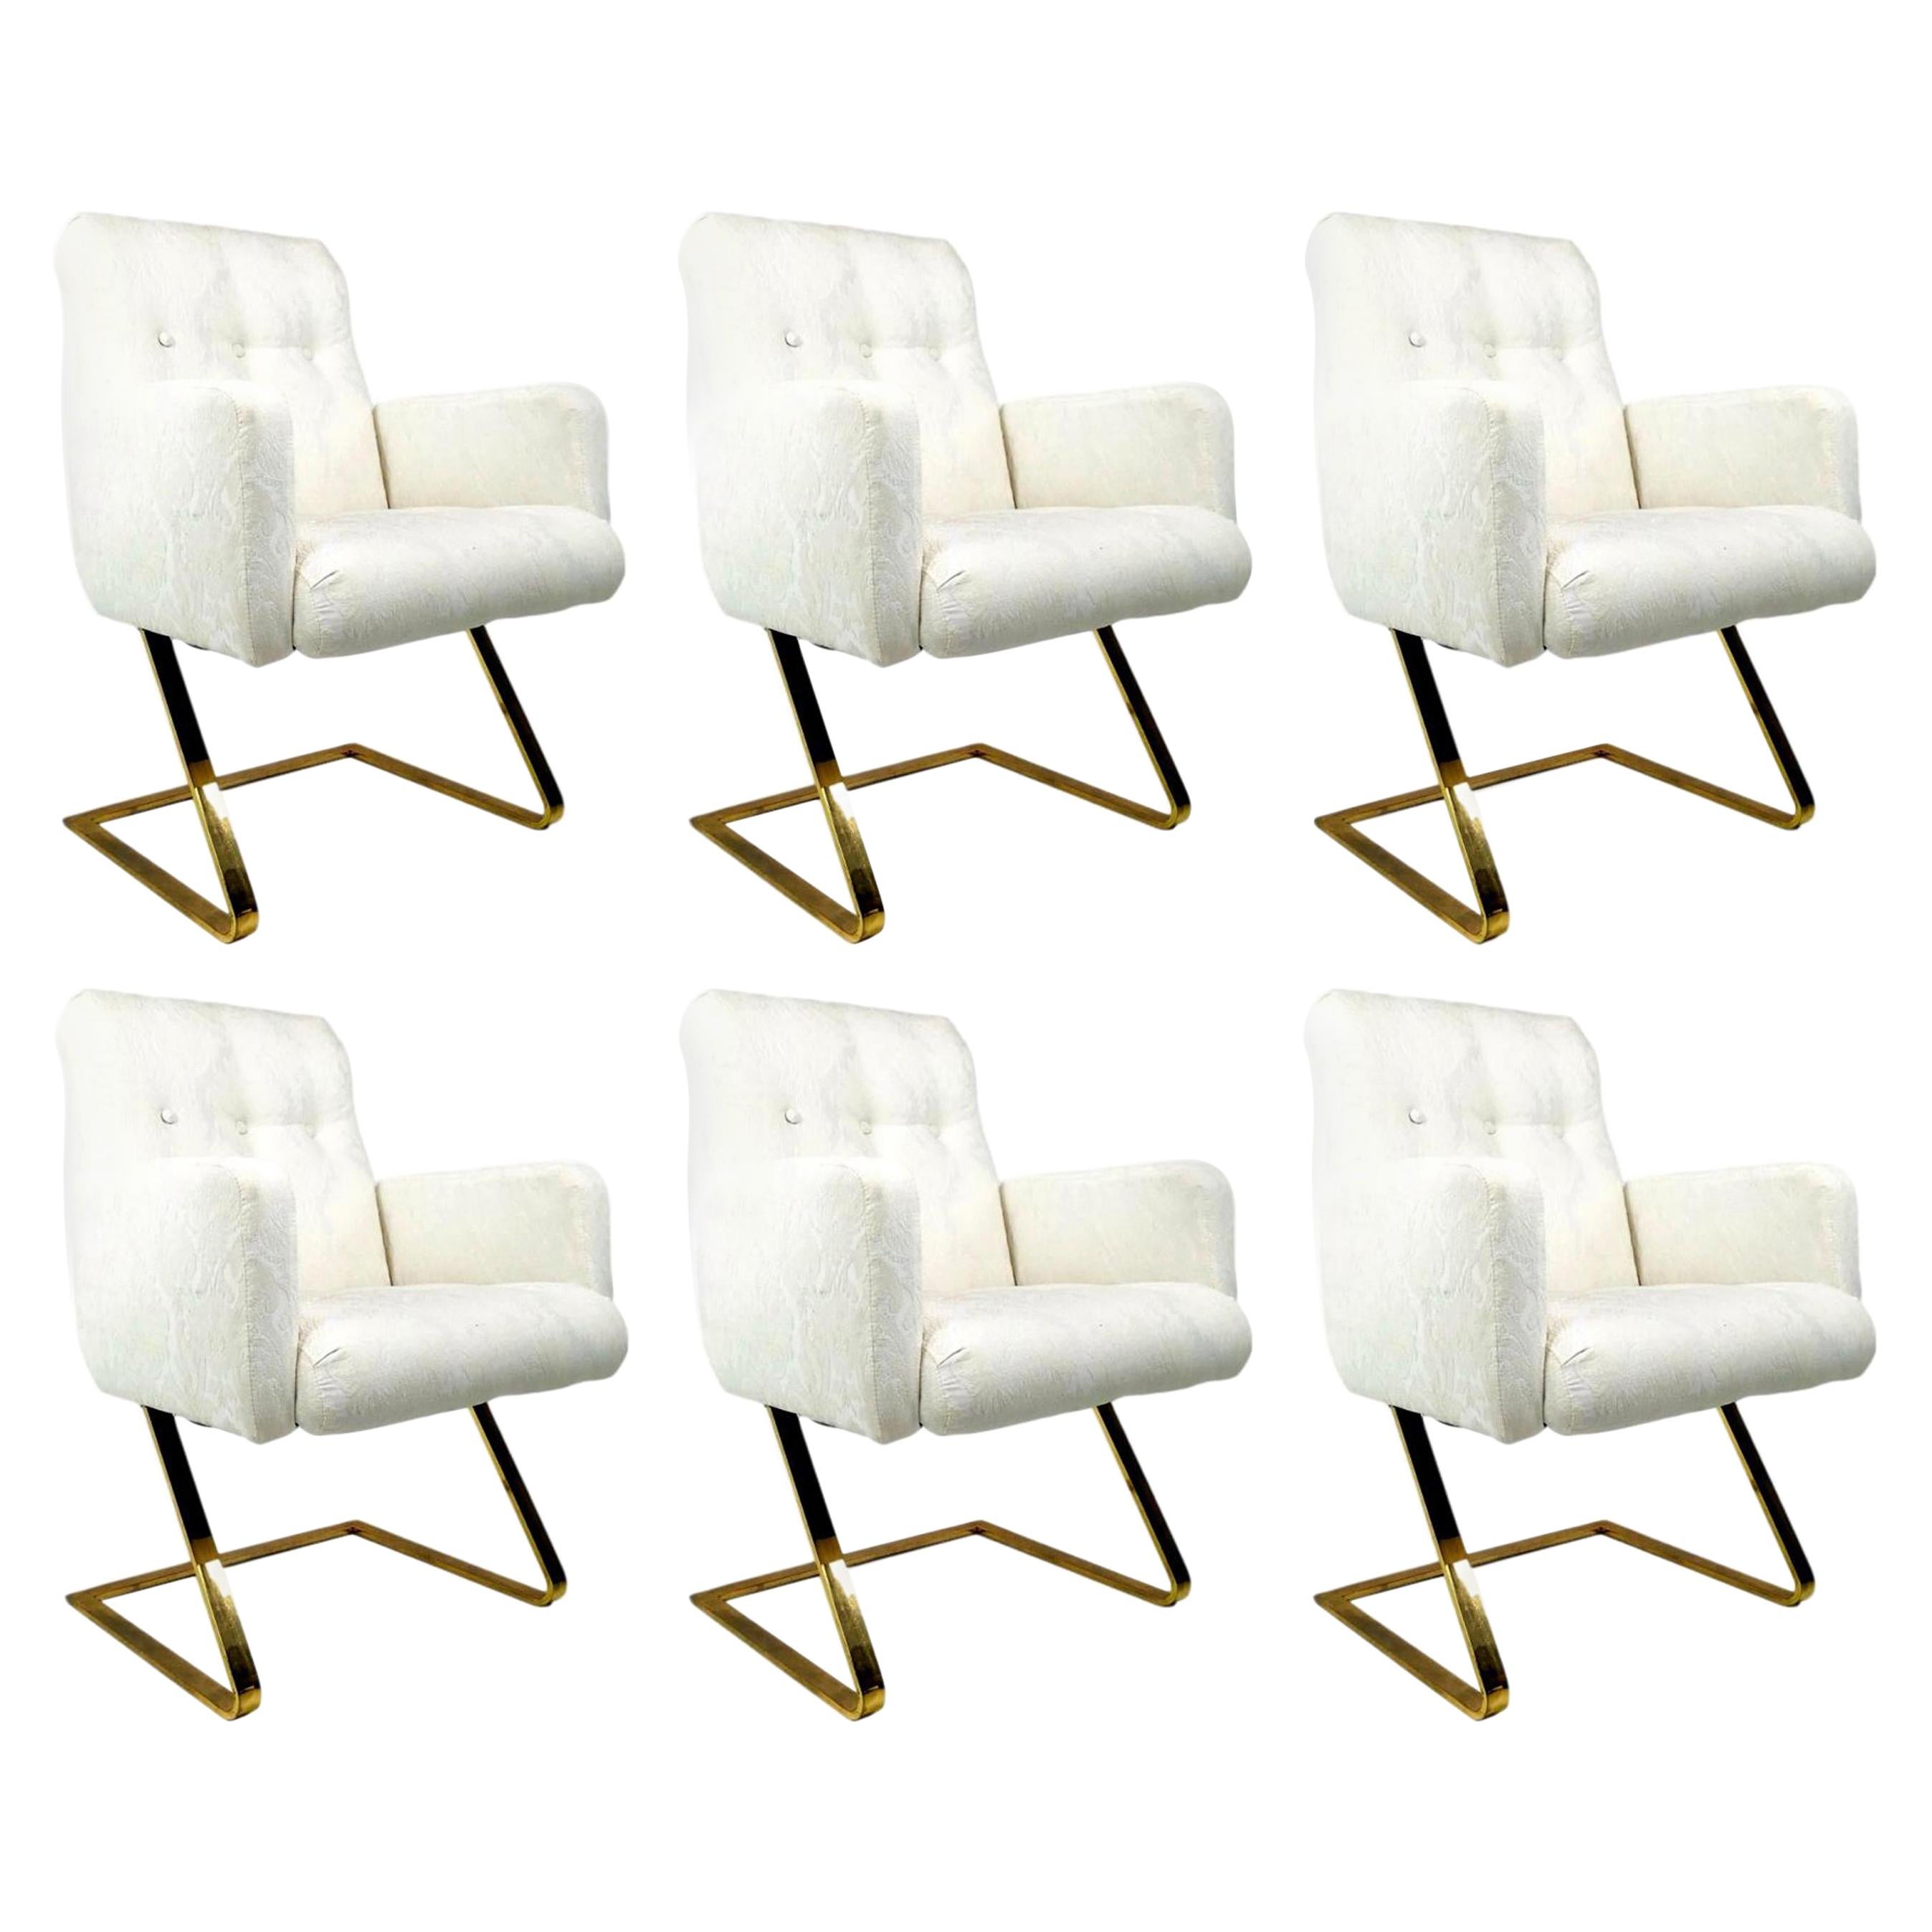 Set of 6 DIA Brass Cantilever Chairs